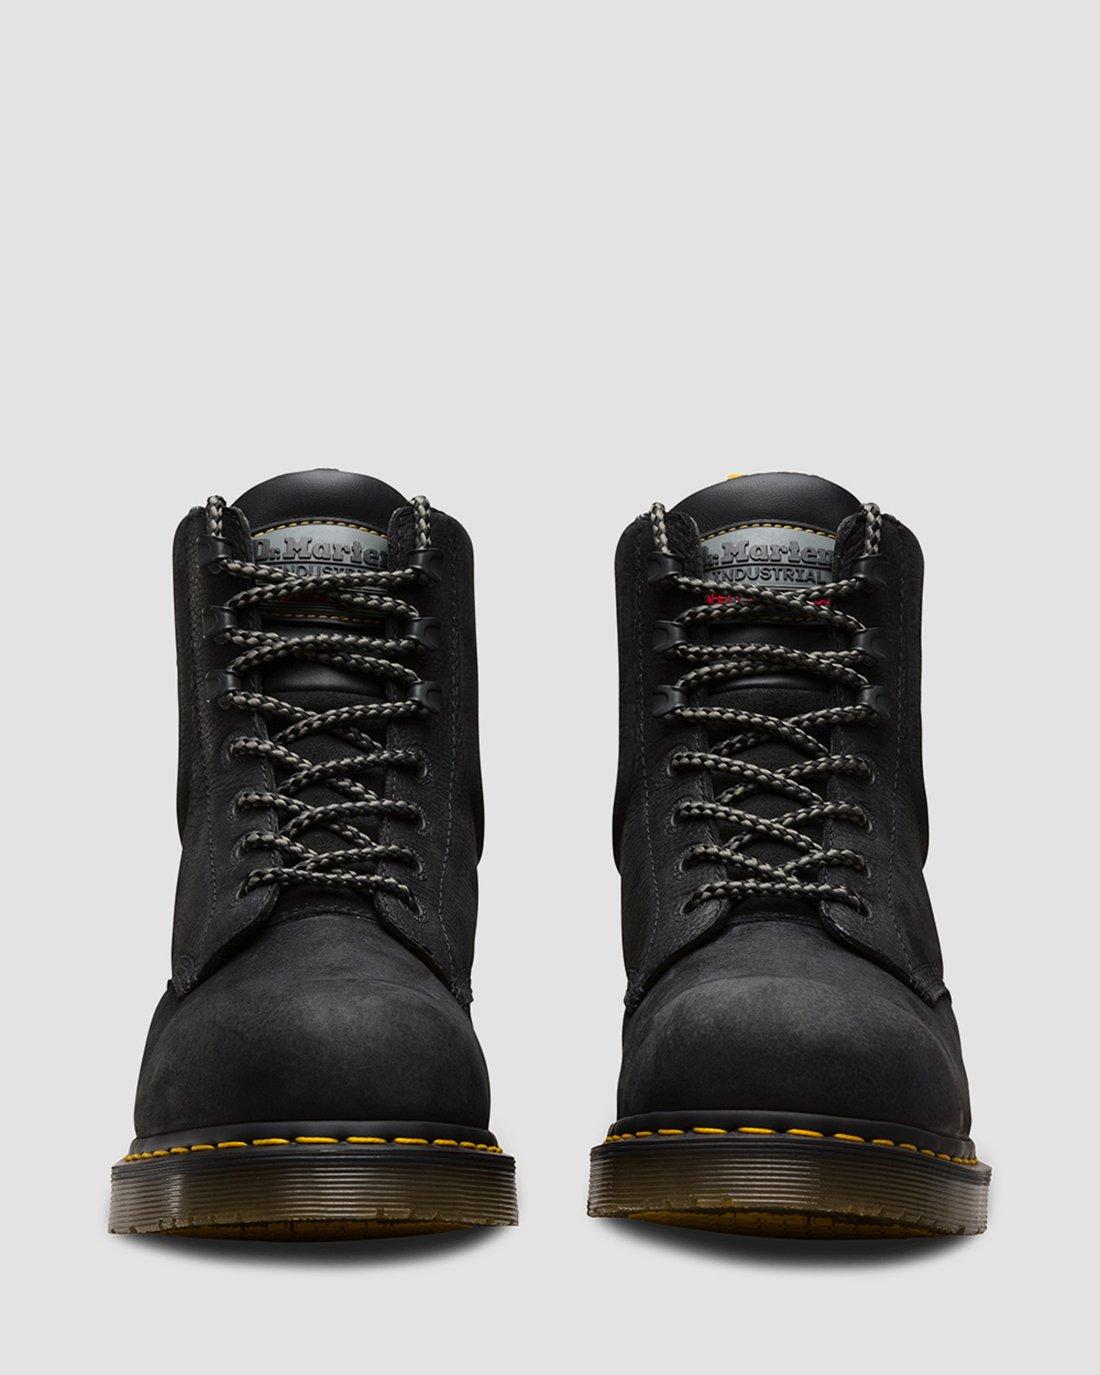 dr martens hyten s1p safety boots